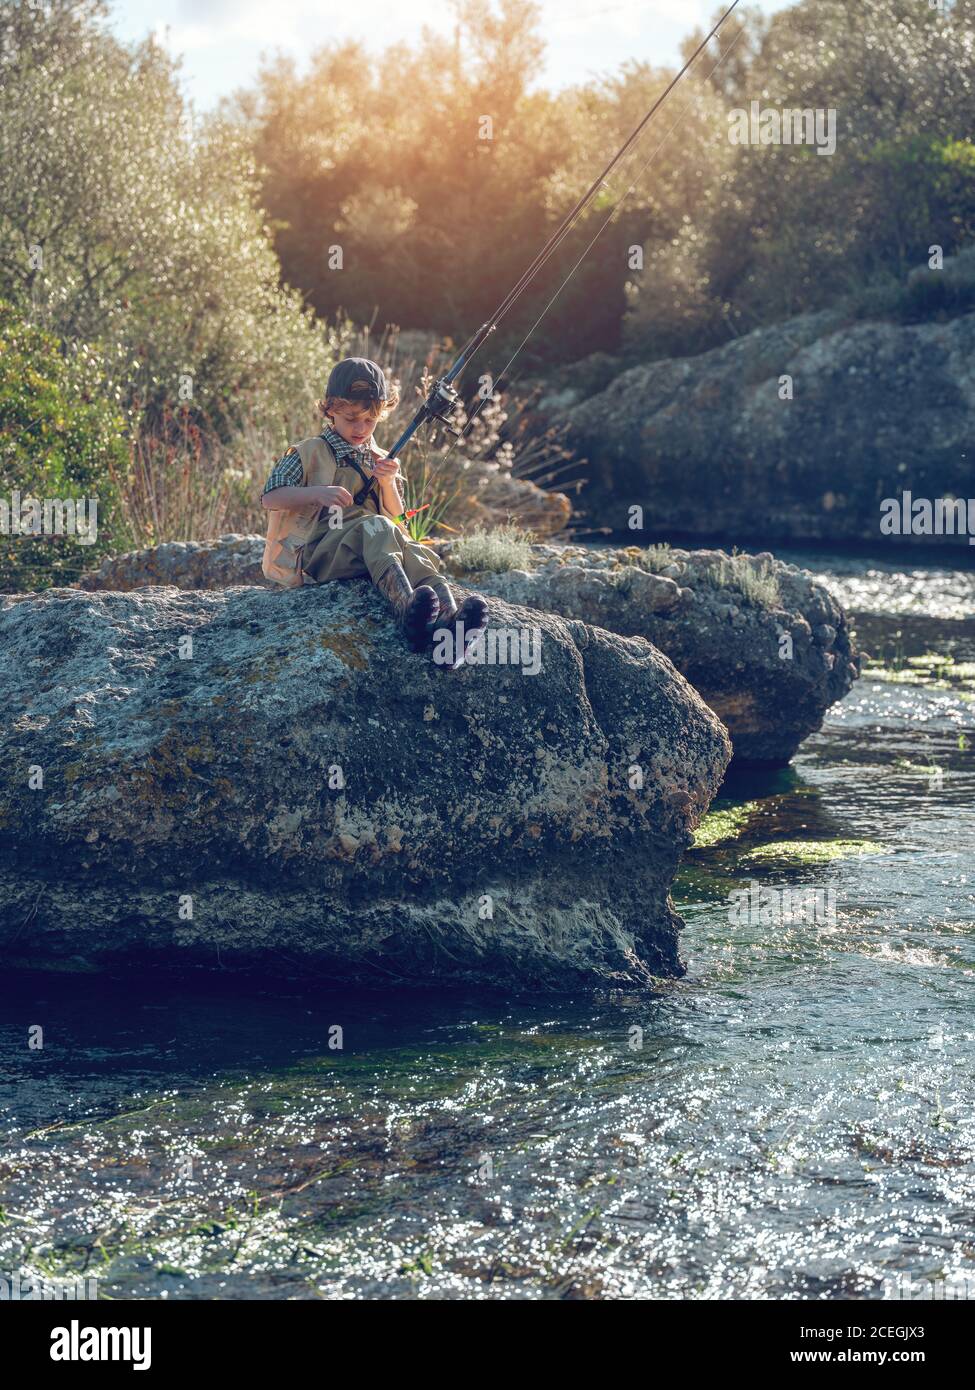 Young boy sitting and fishing Stock Photo